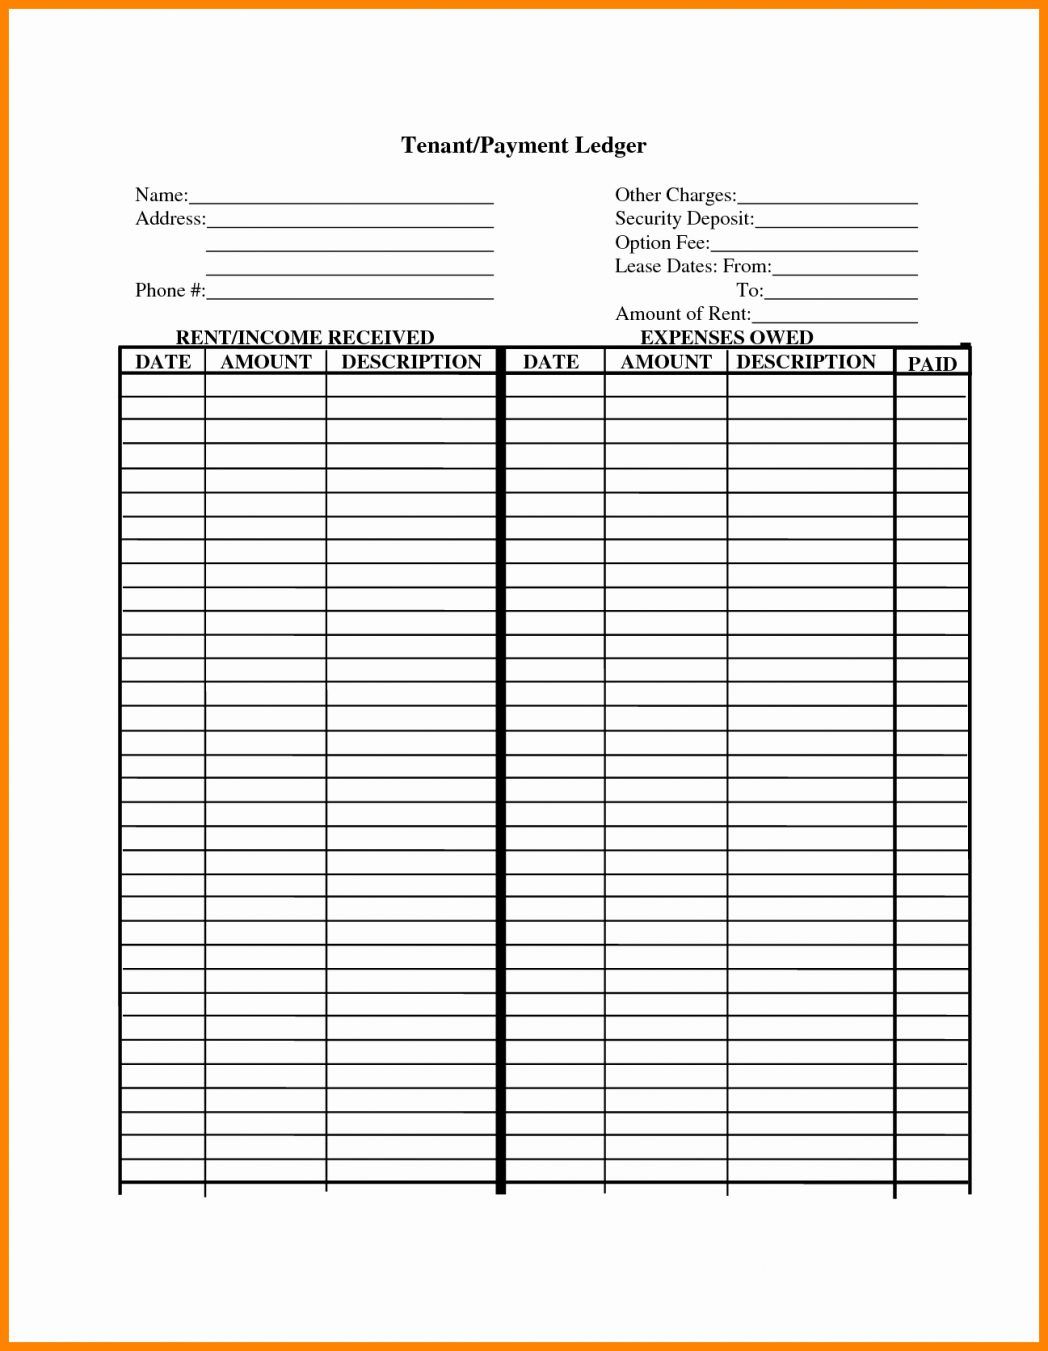 Tenant Rent Tracking Spreadsheet Pertaining To Tenant Rent Tracking Spreadsheet Unique 8 Rental Ledger Template Qld